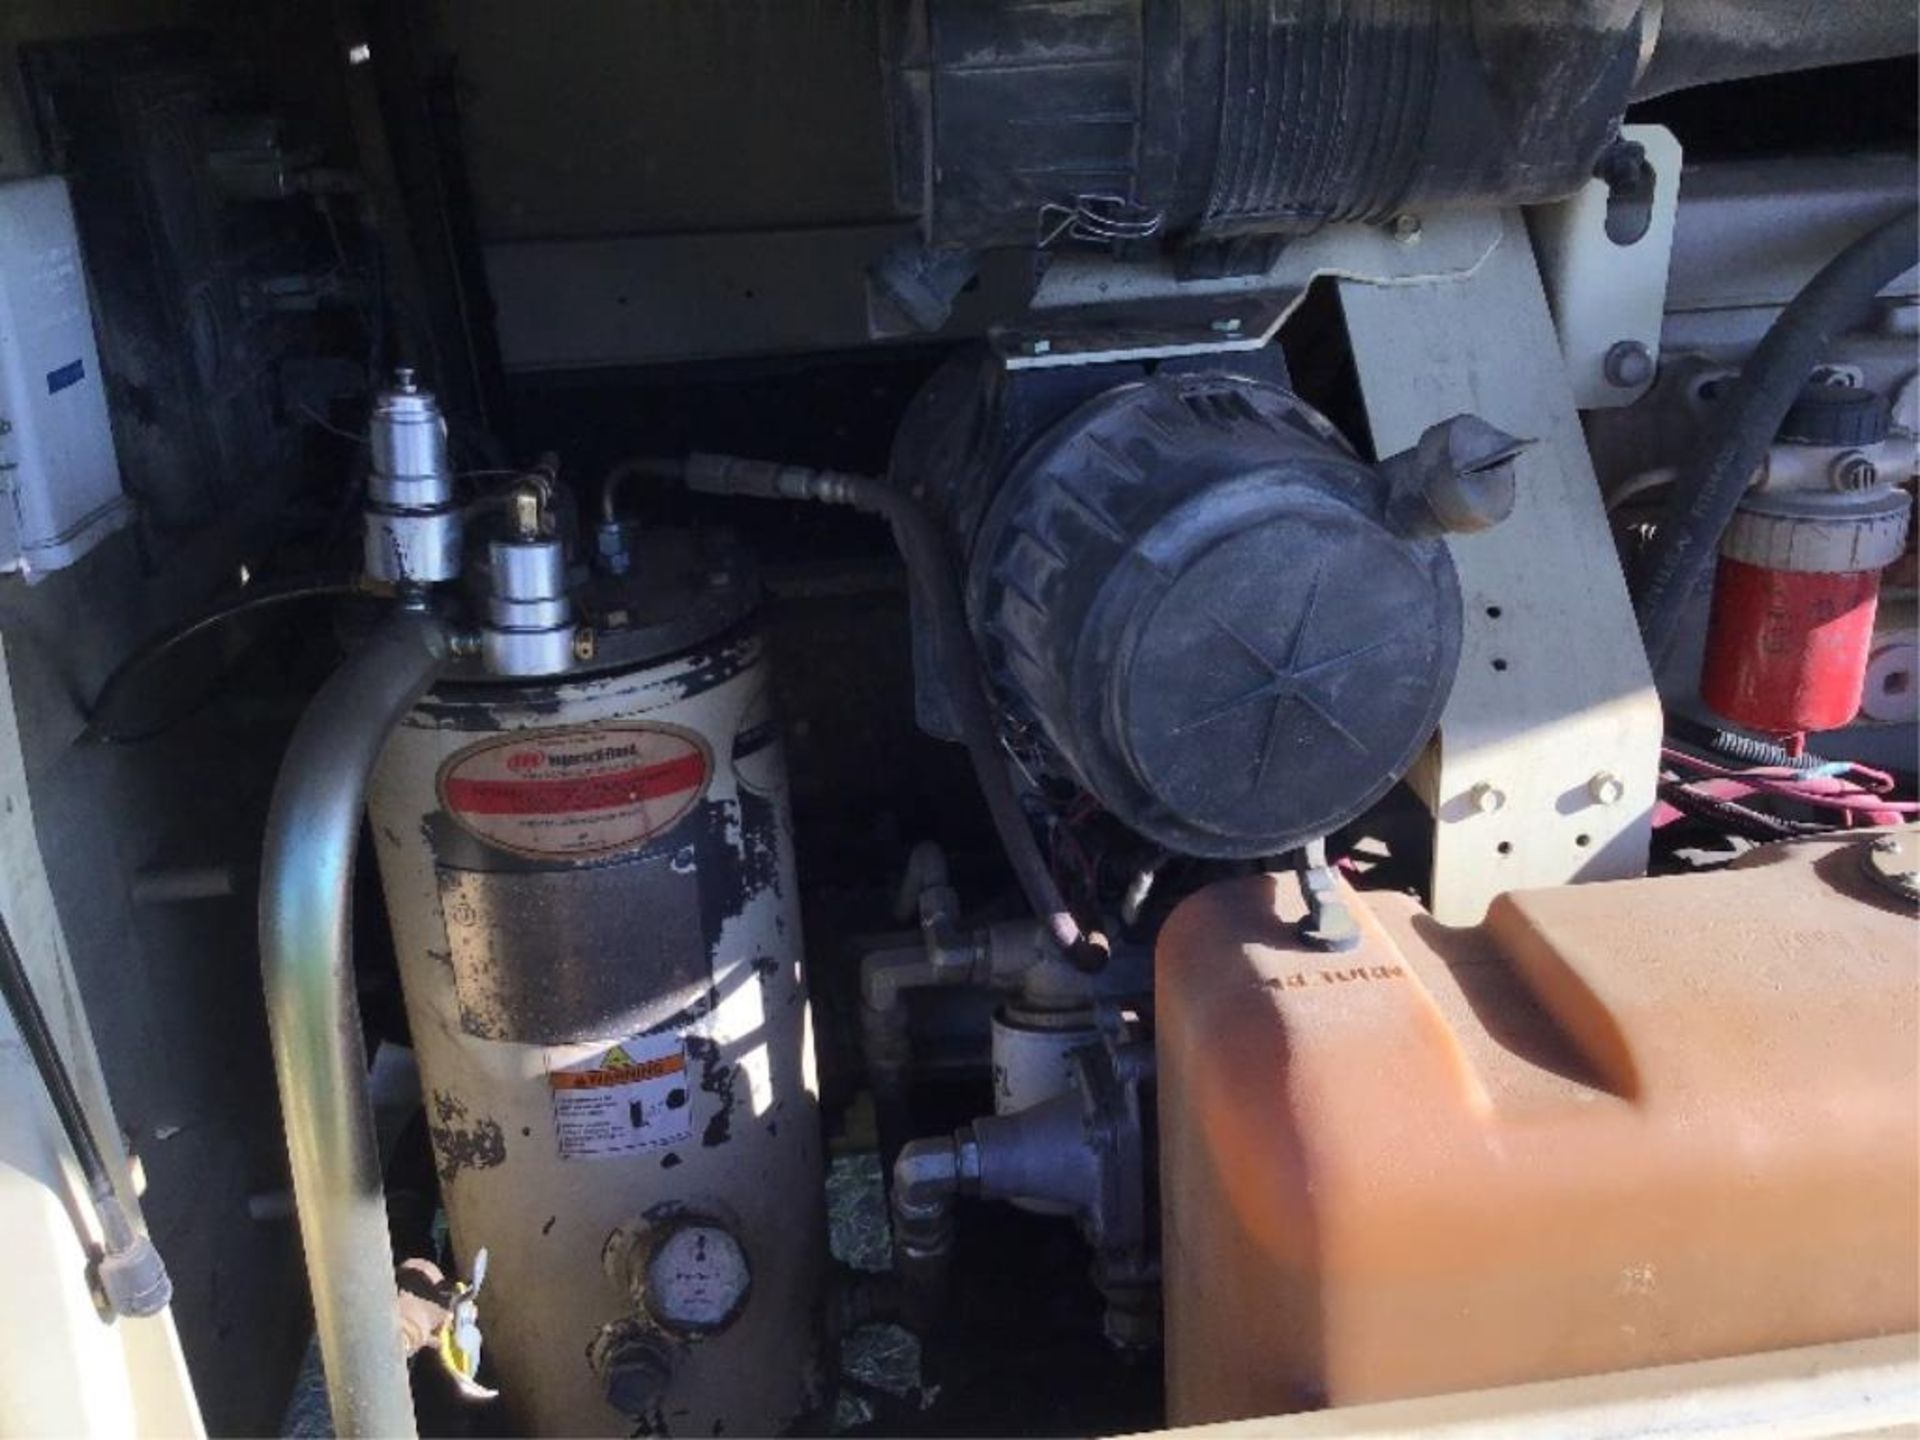 2003 Ingersoll Rand 185 Blower Compressor 2715hrs - Image 6 of 10